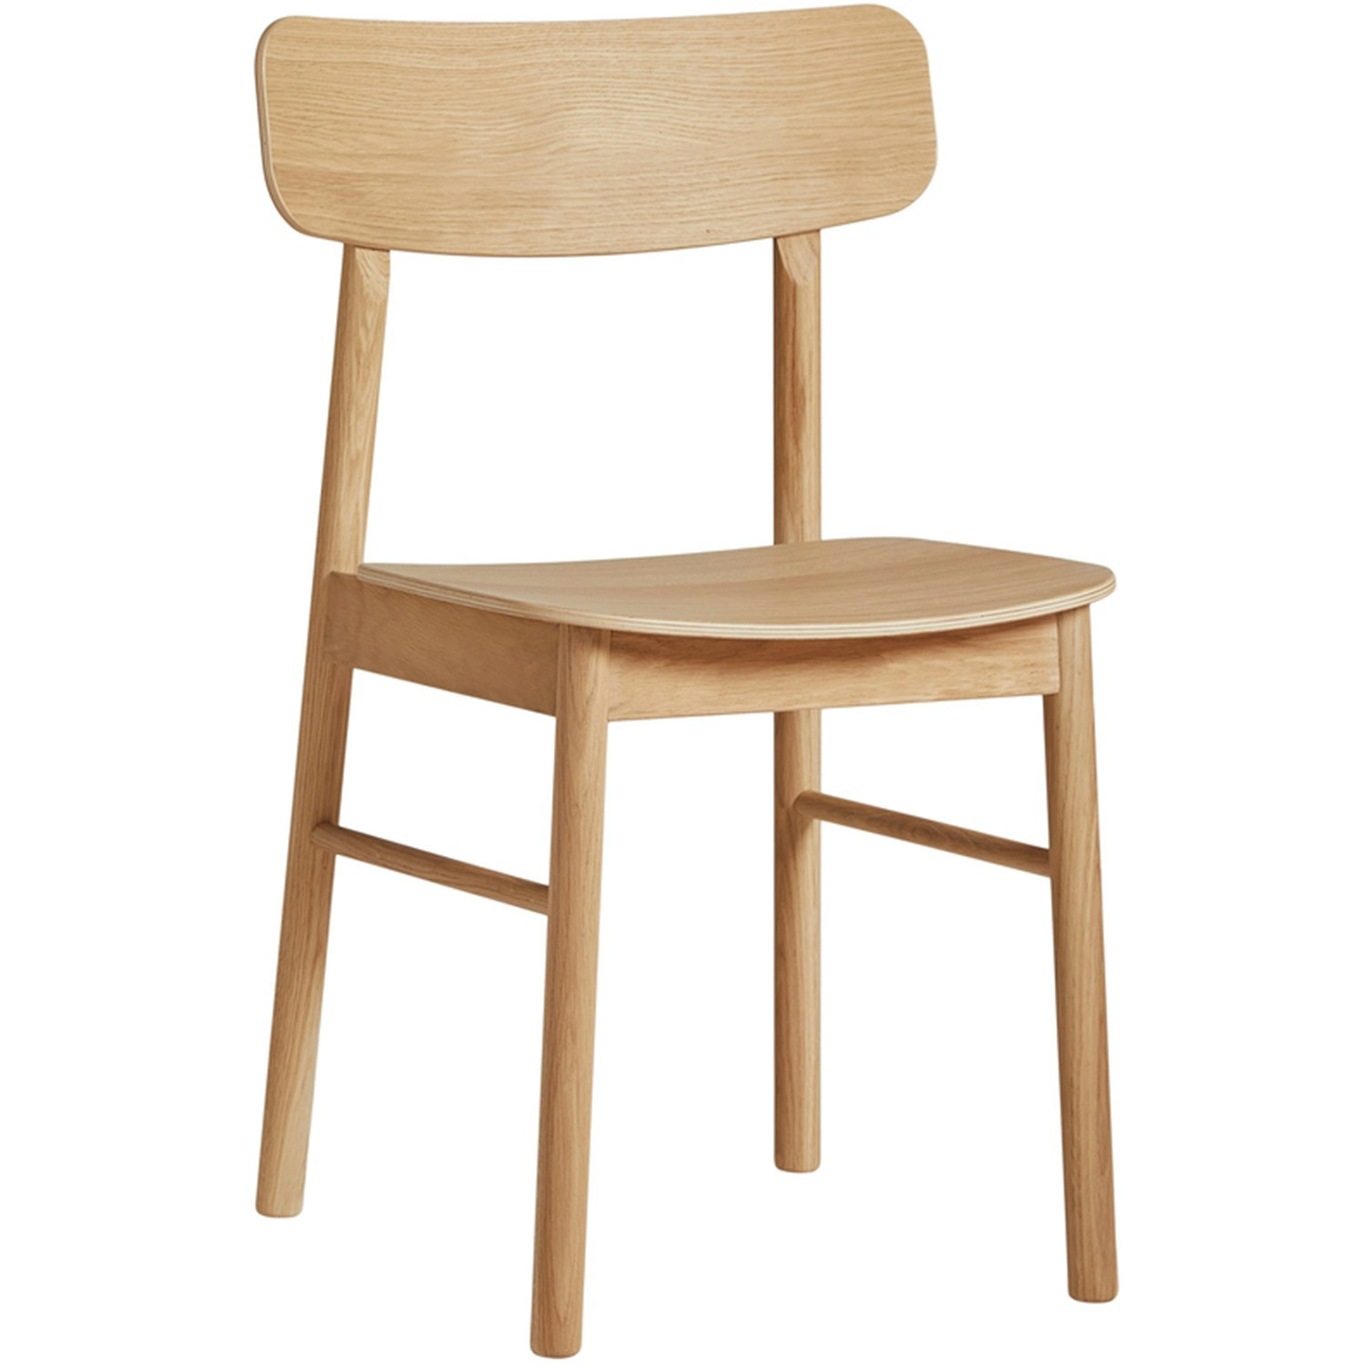 Soma Dining Chair, Oiled Oak